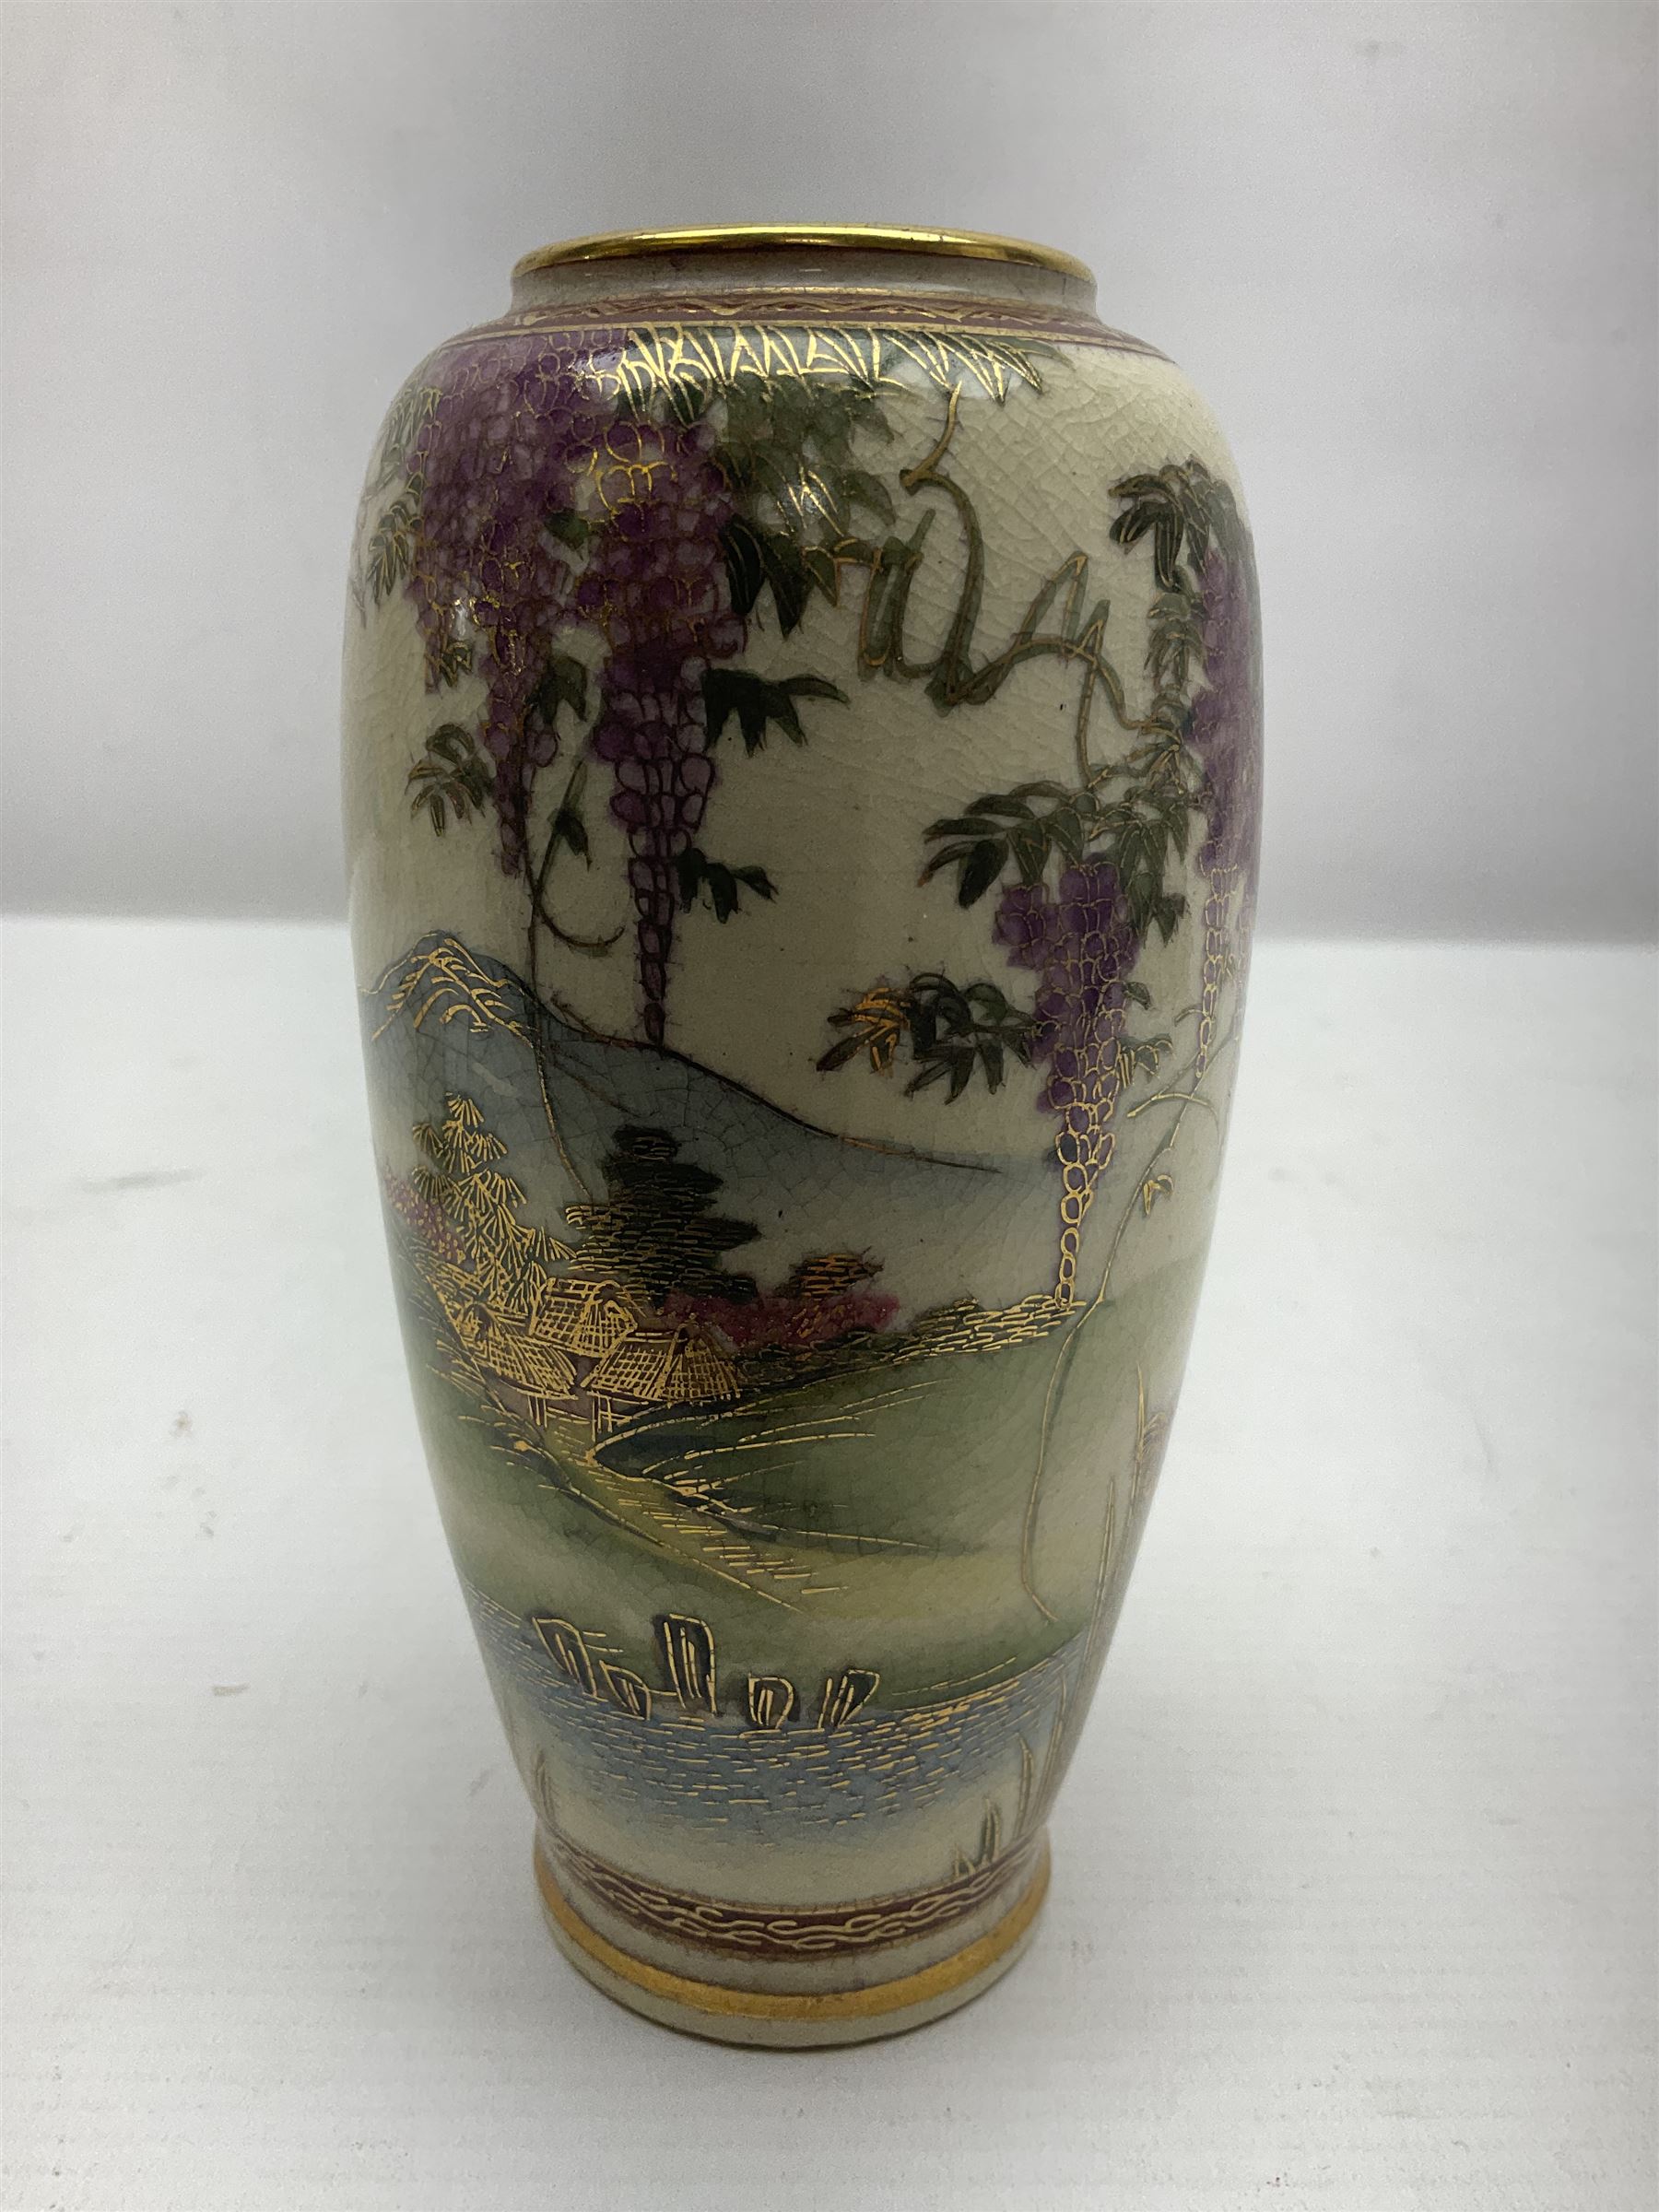 Japanese Satsuma Meiji period vase painted with a mountainous river landscape scene with wisteria an - Image 7 of 9